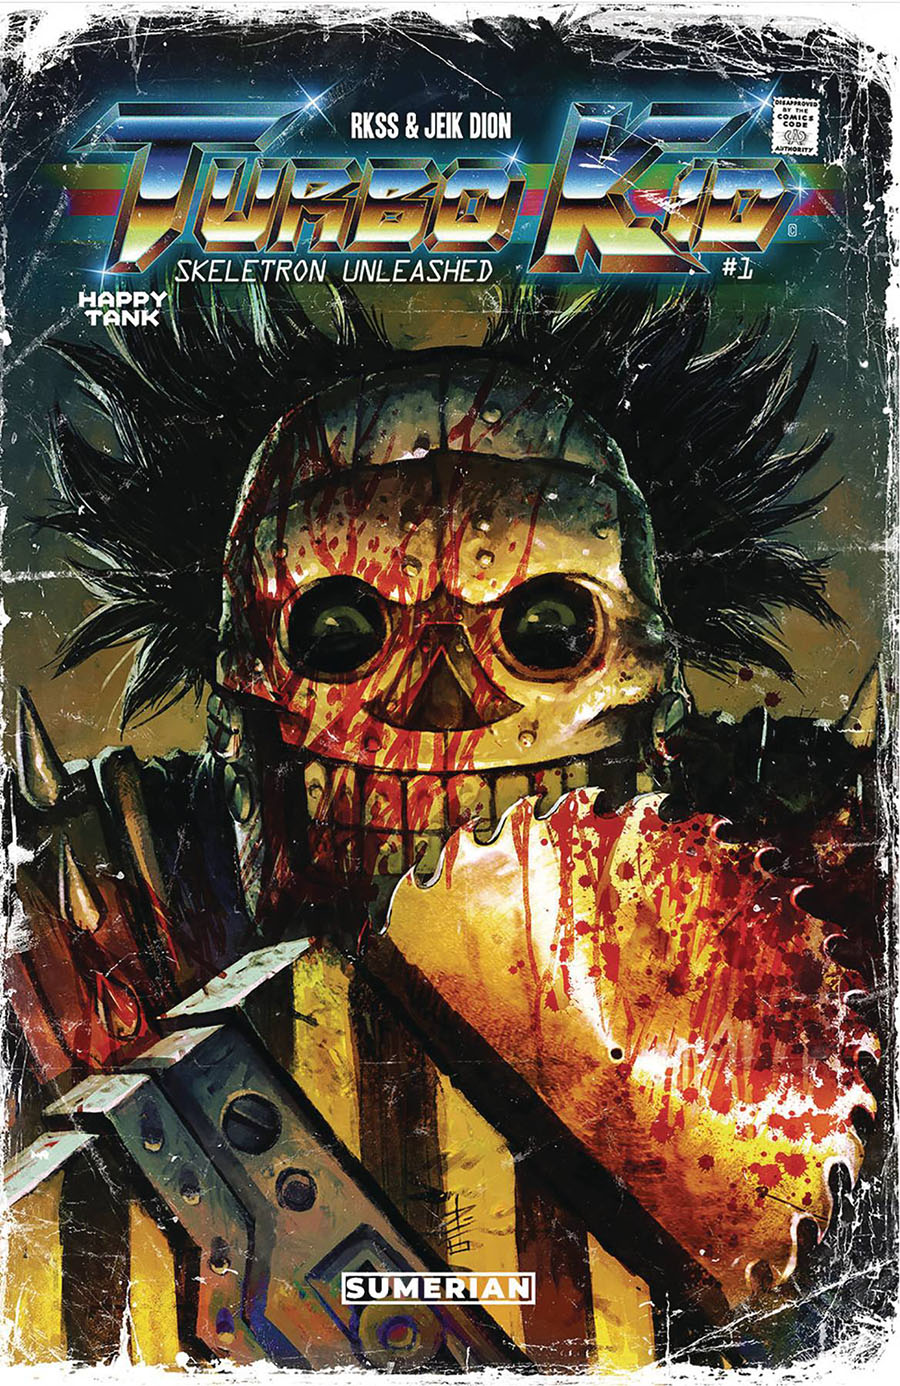 Turbo Kid Skeletron Unleashed #1 Cover A Regular Jeik Dion Cover